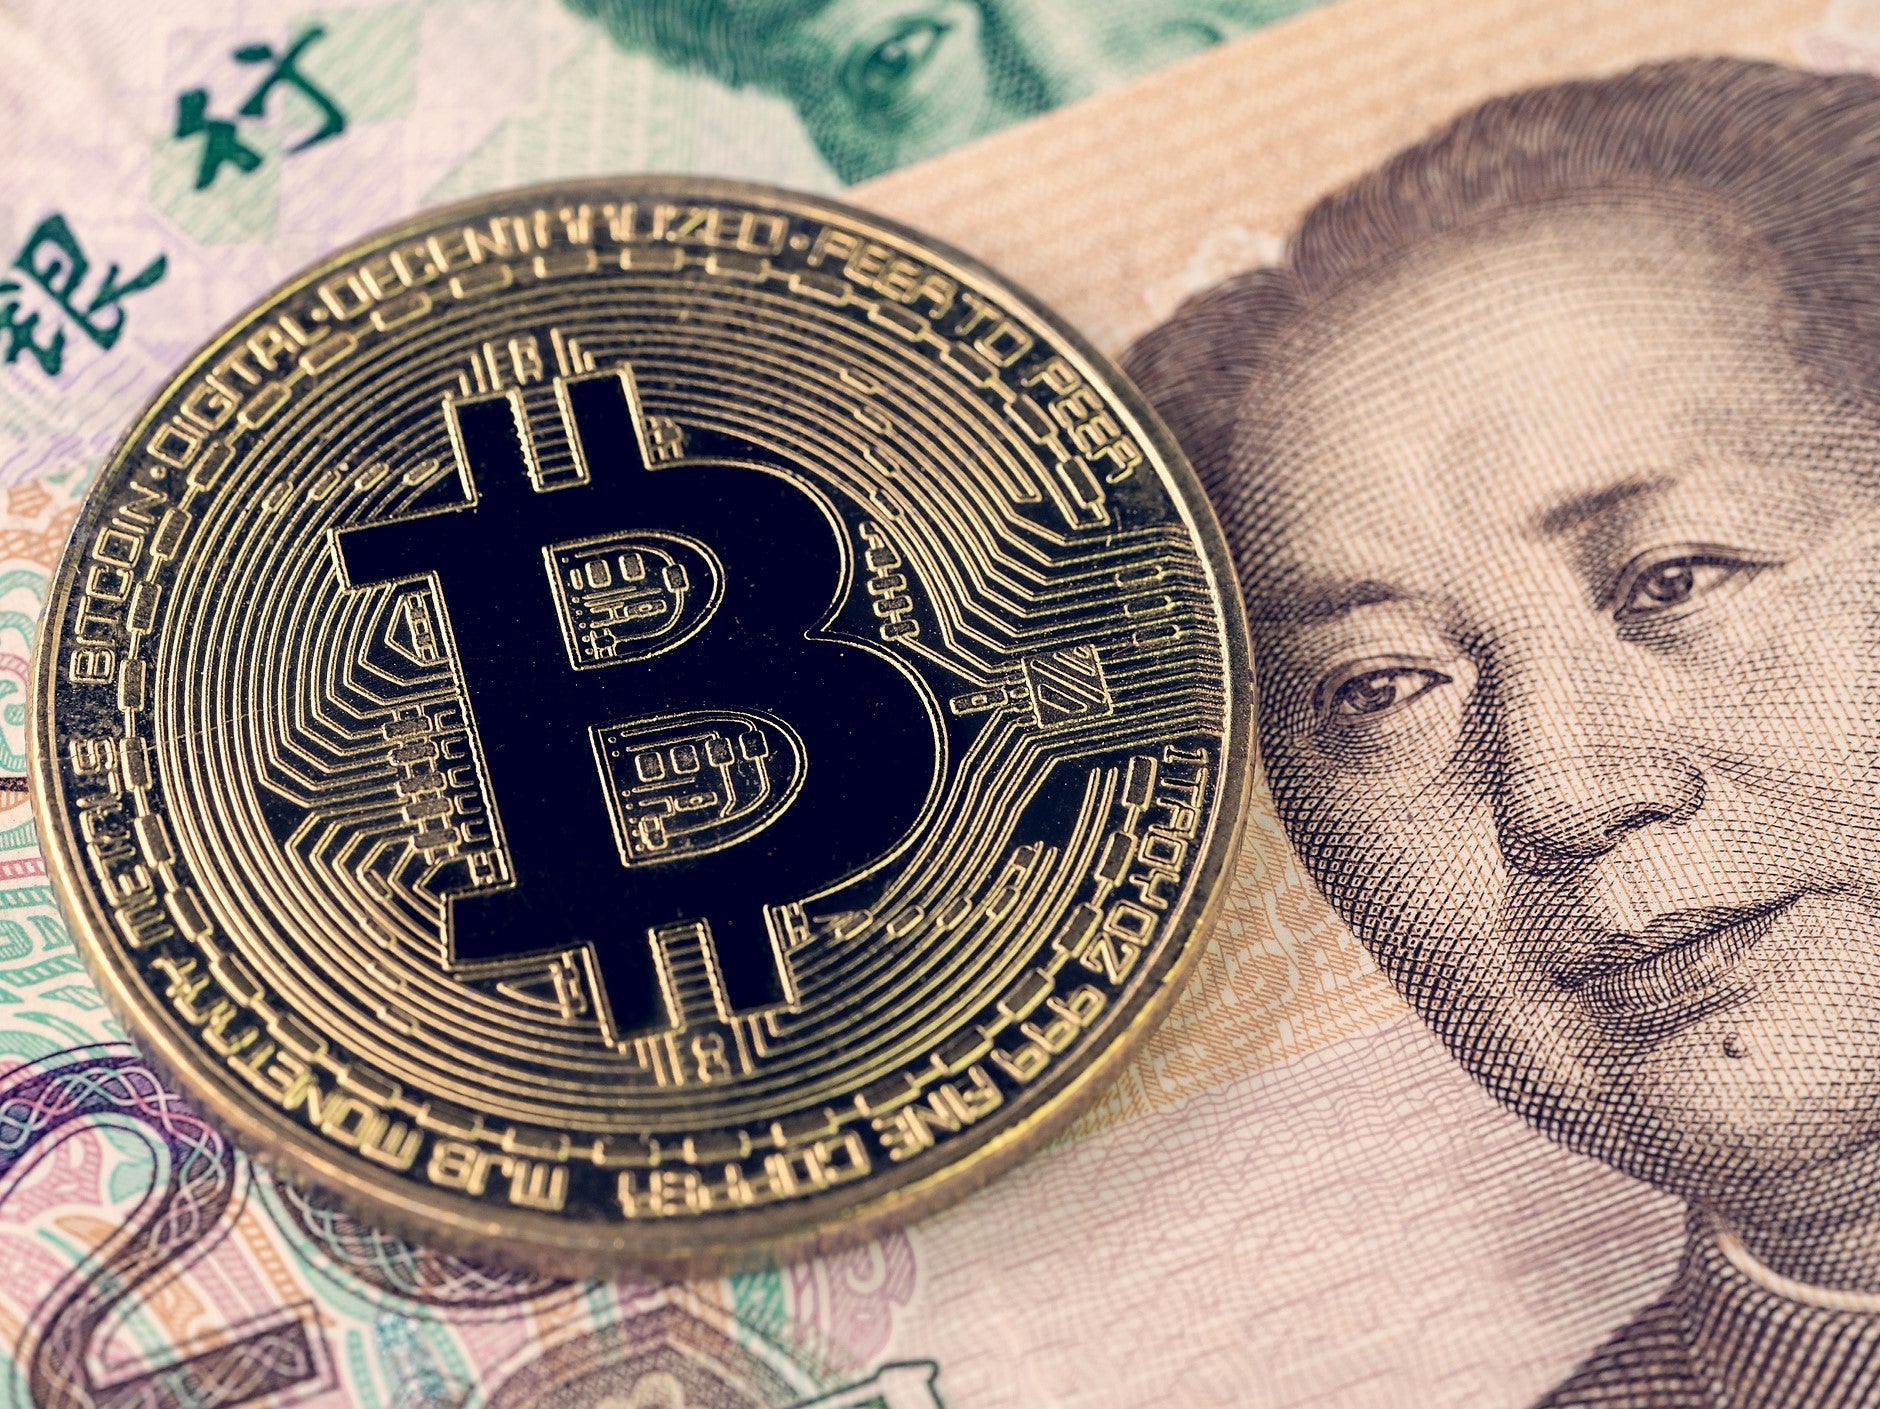 China’s crackdown on bitcoin mining and trading heavily impacted the crypto market in 2021